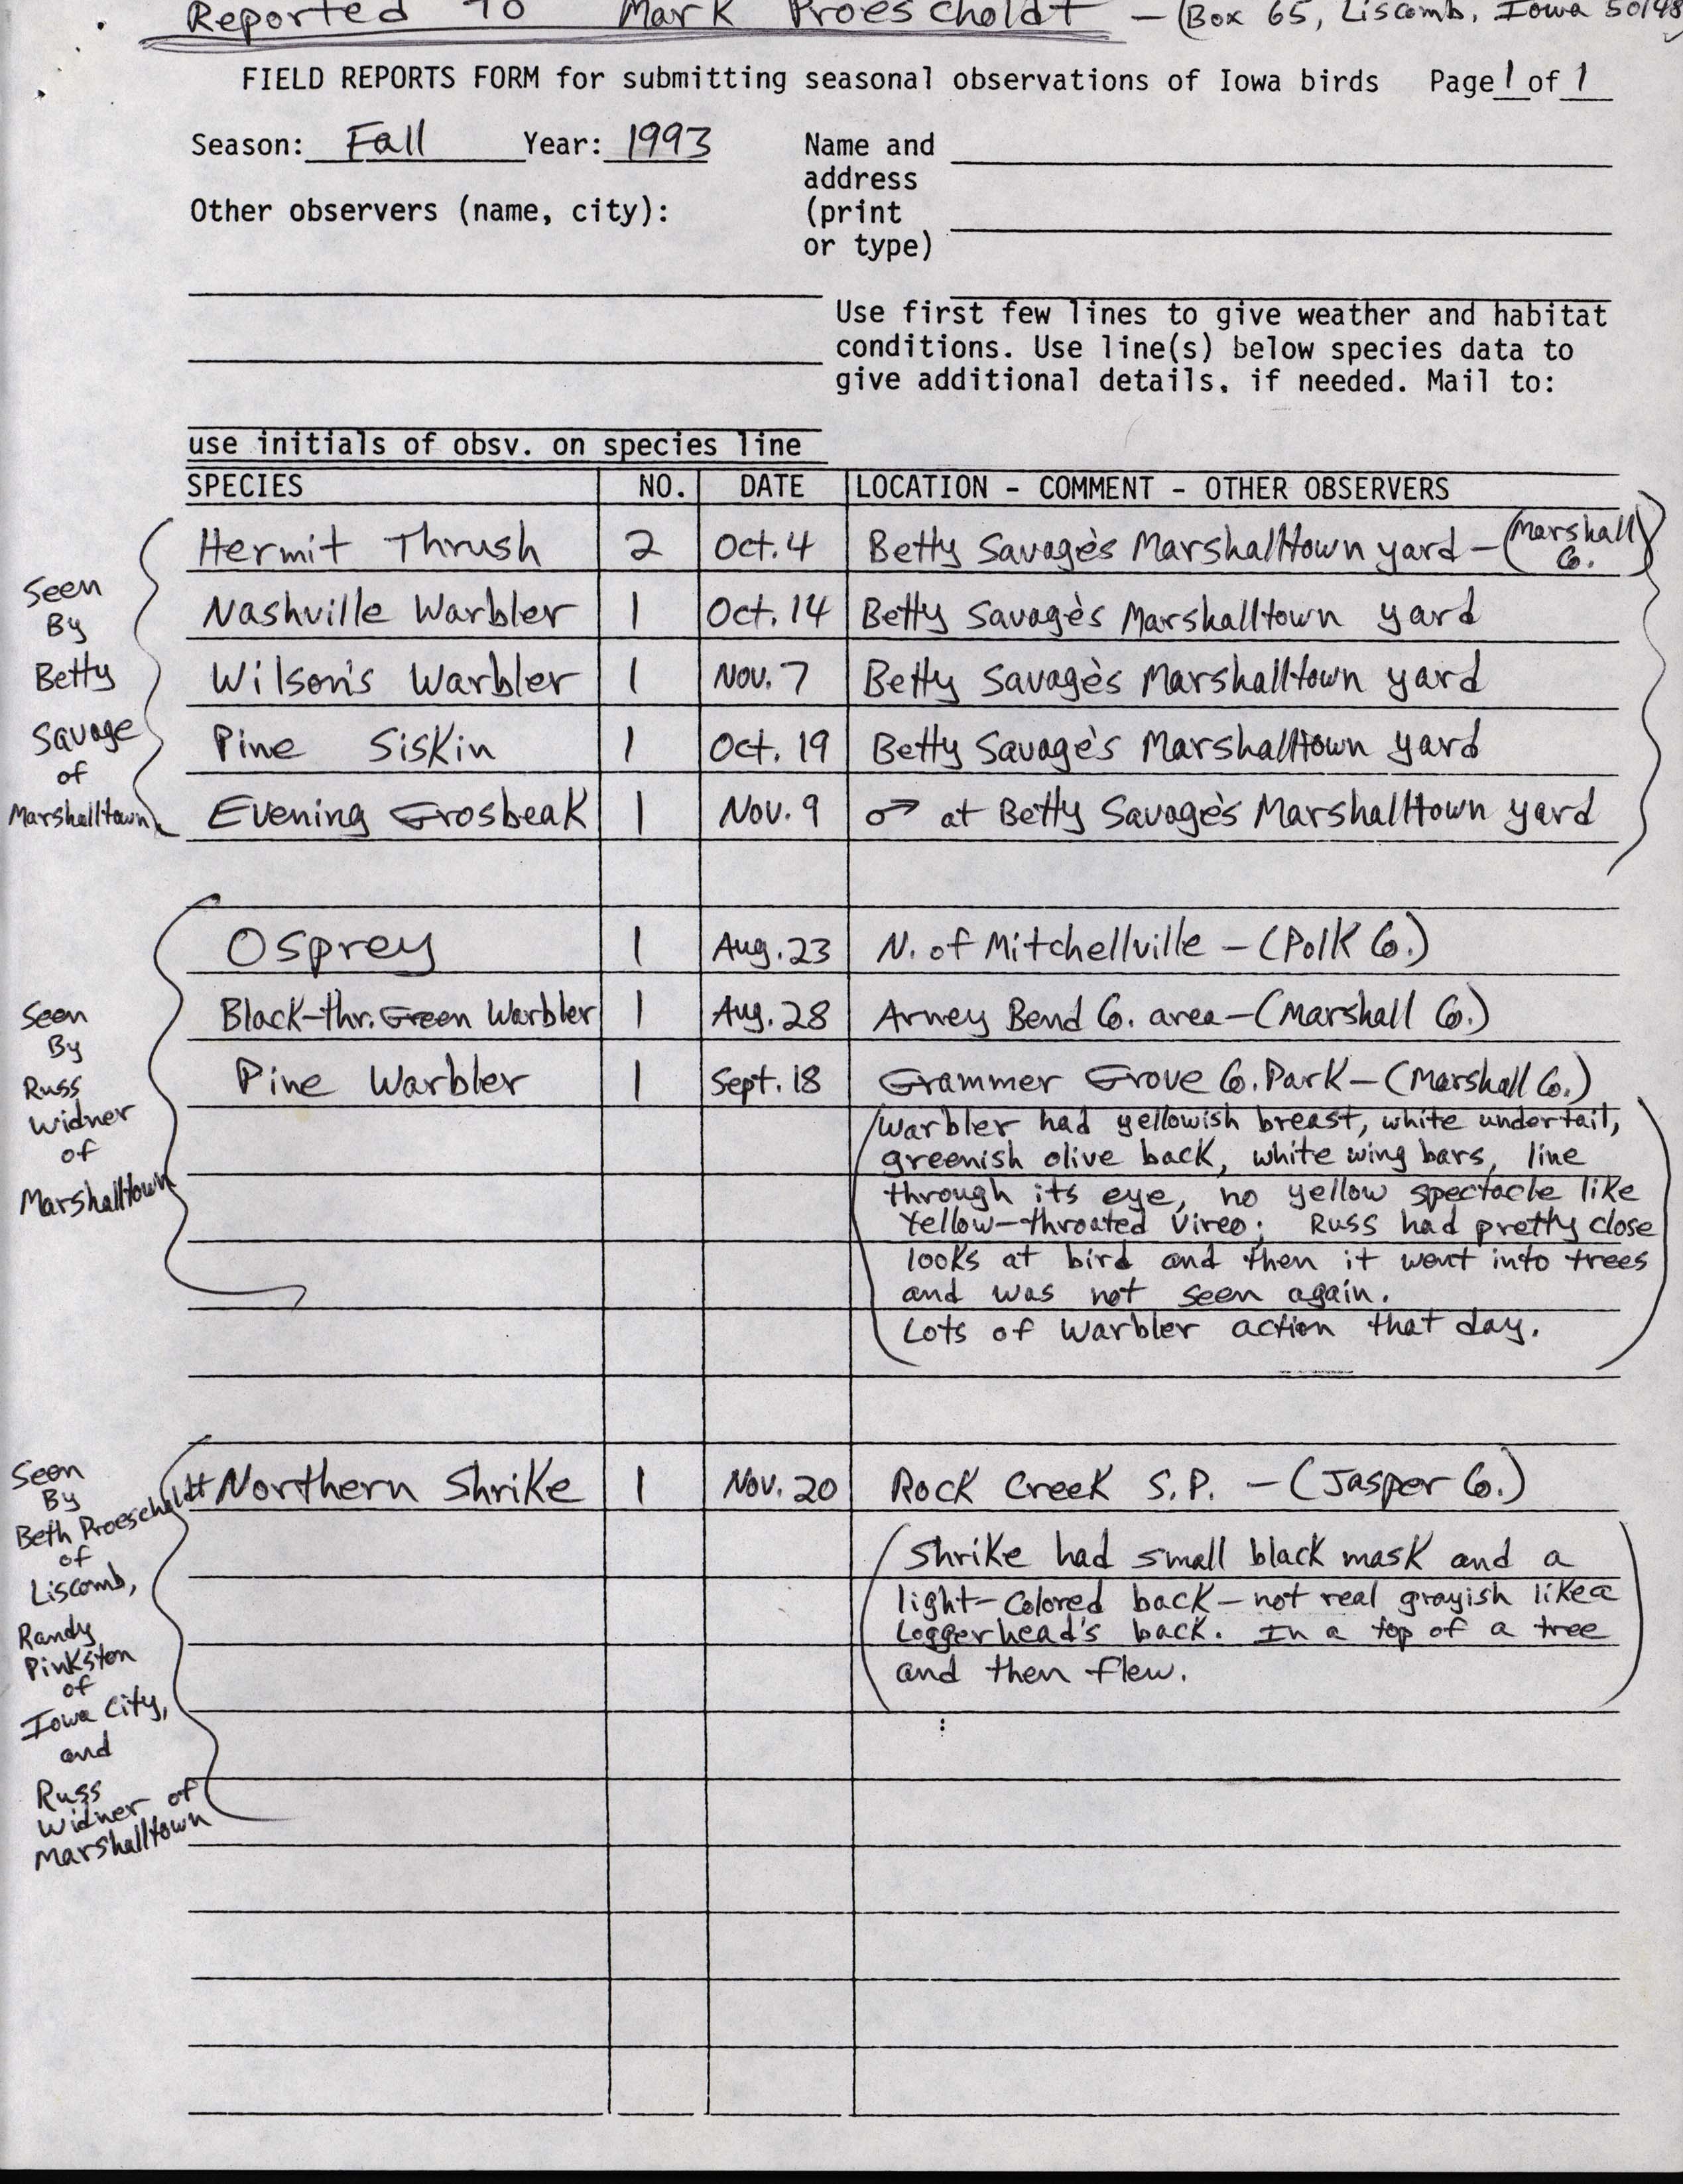 Field reports form for submitting seasonal observations of Iowa birds, reported to Mark Proescholdt, fall 1993